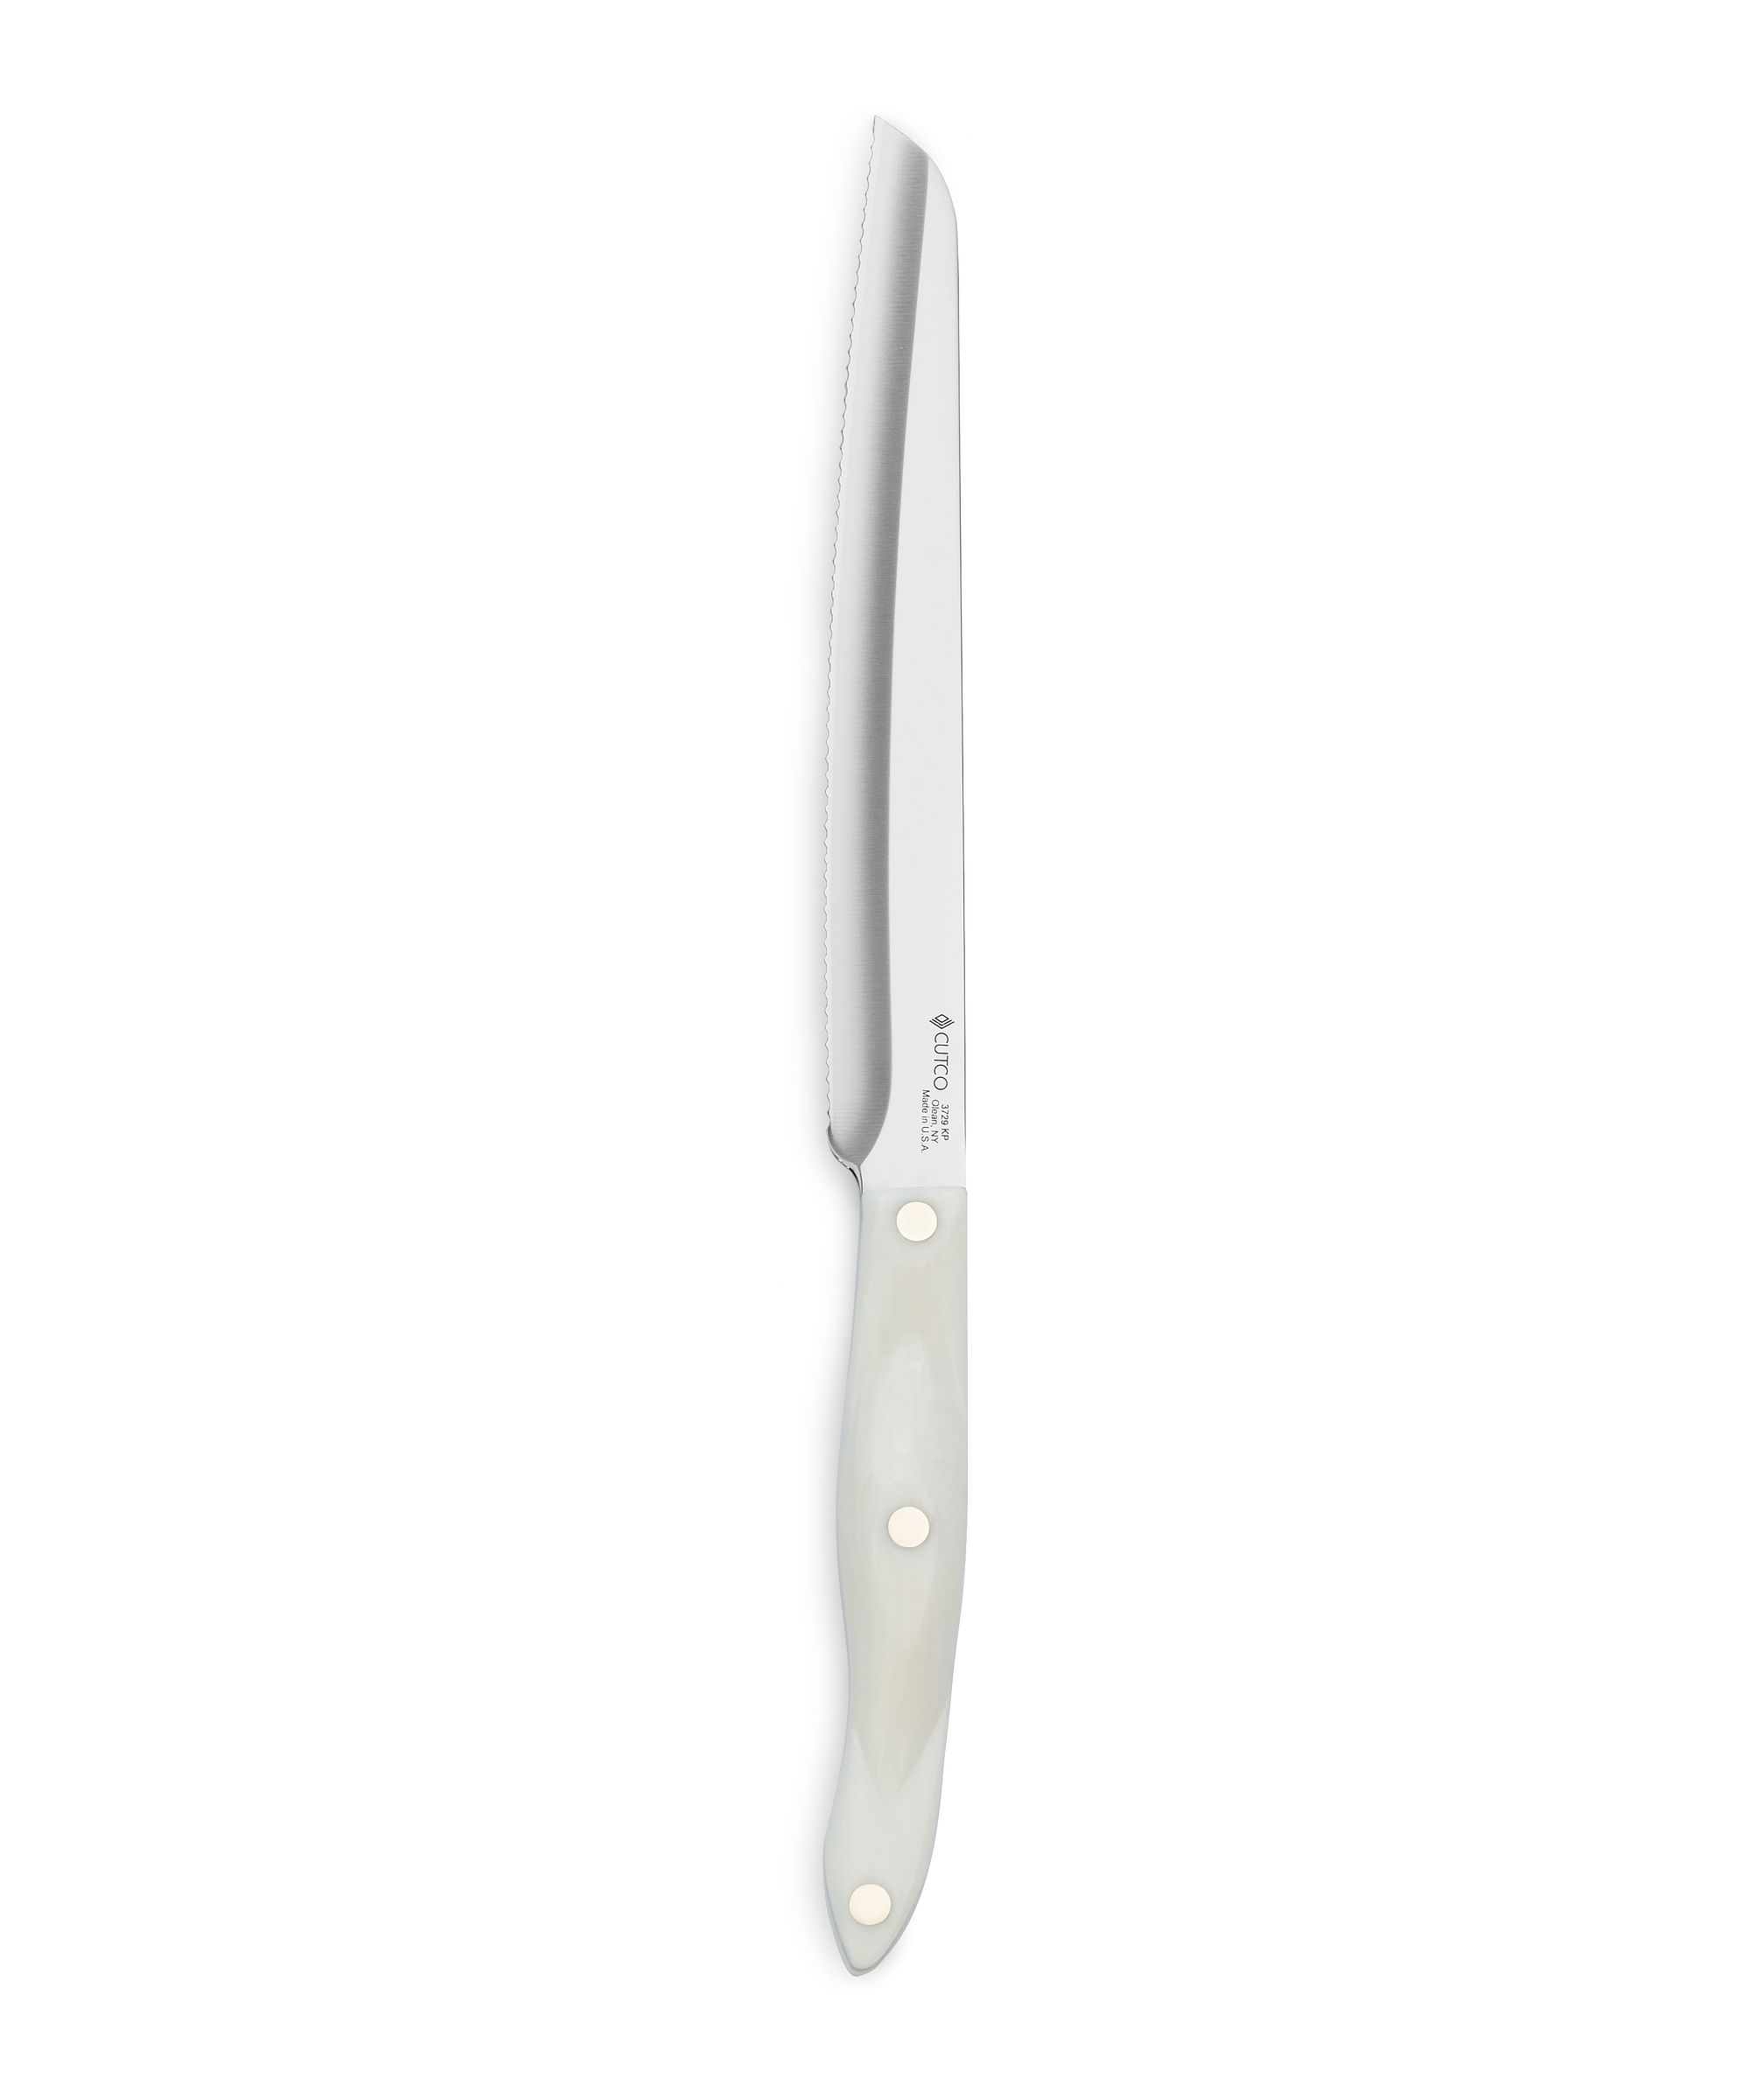 Cutco Model 3729 Santoku-Style Carver with 8.2 Double-D Serrated Edge Blade and 5.5 Classic Dark